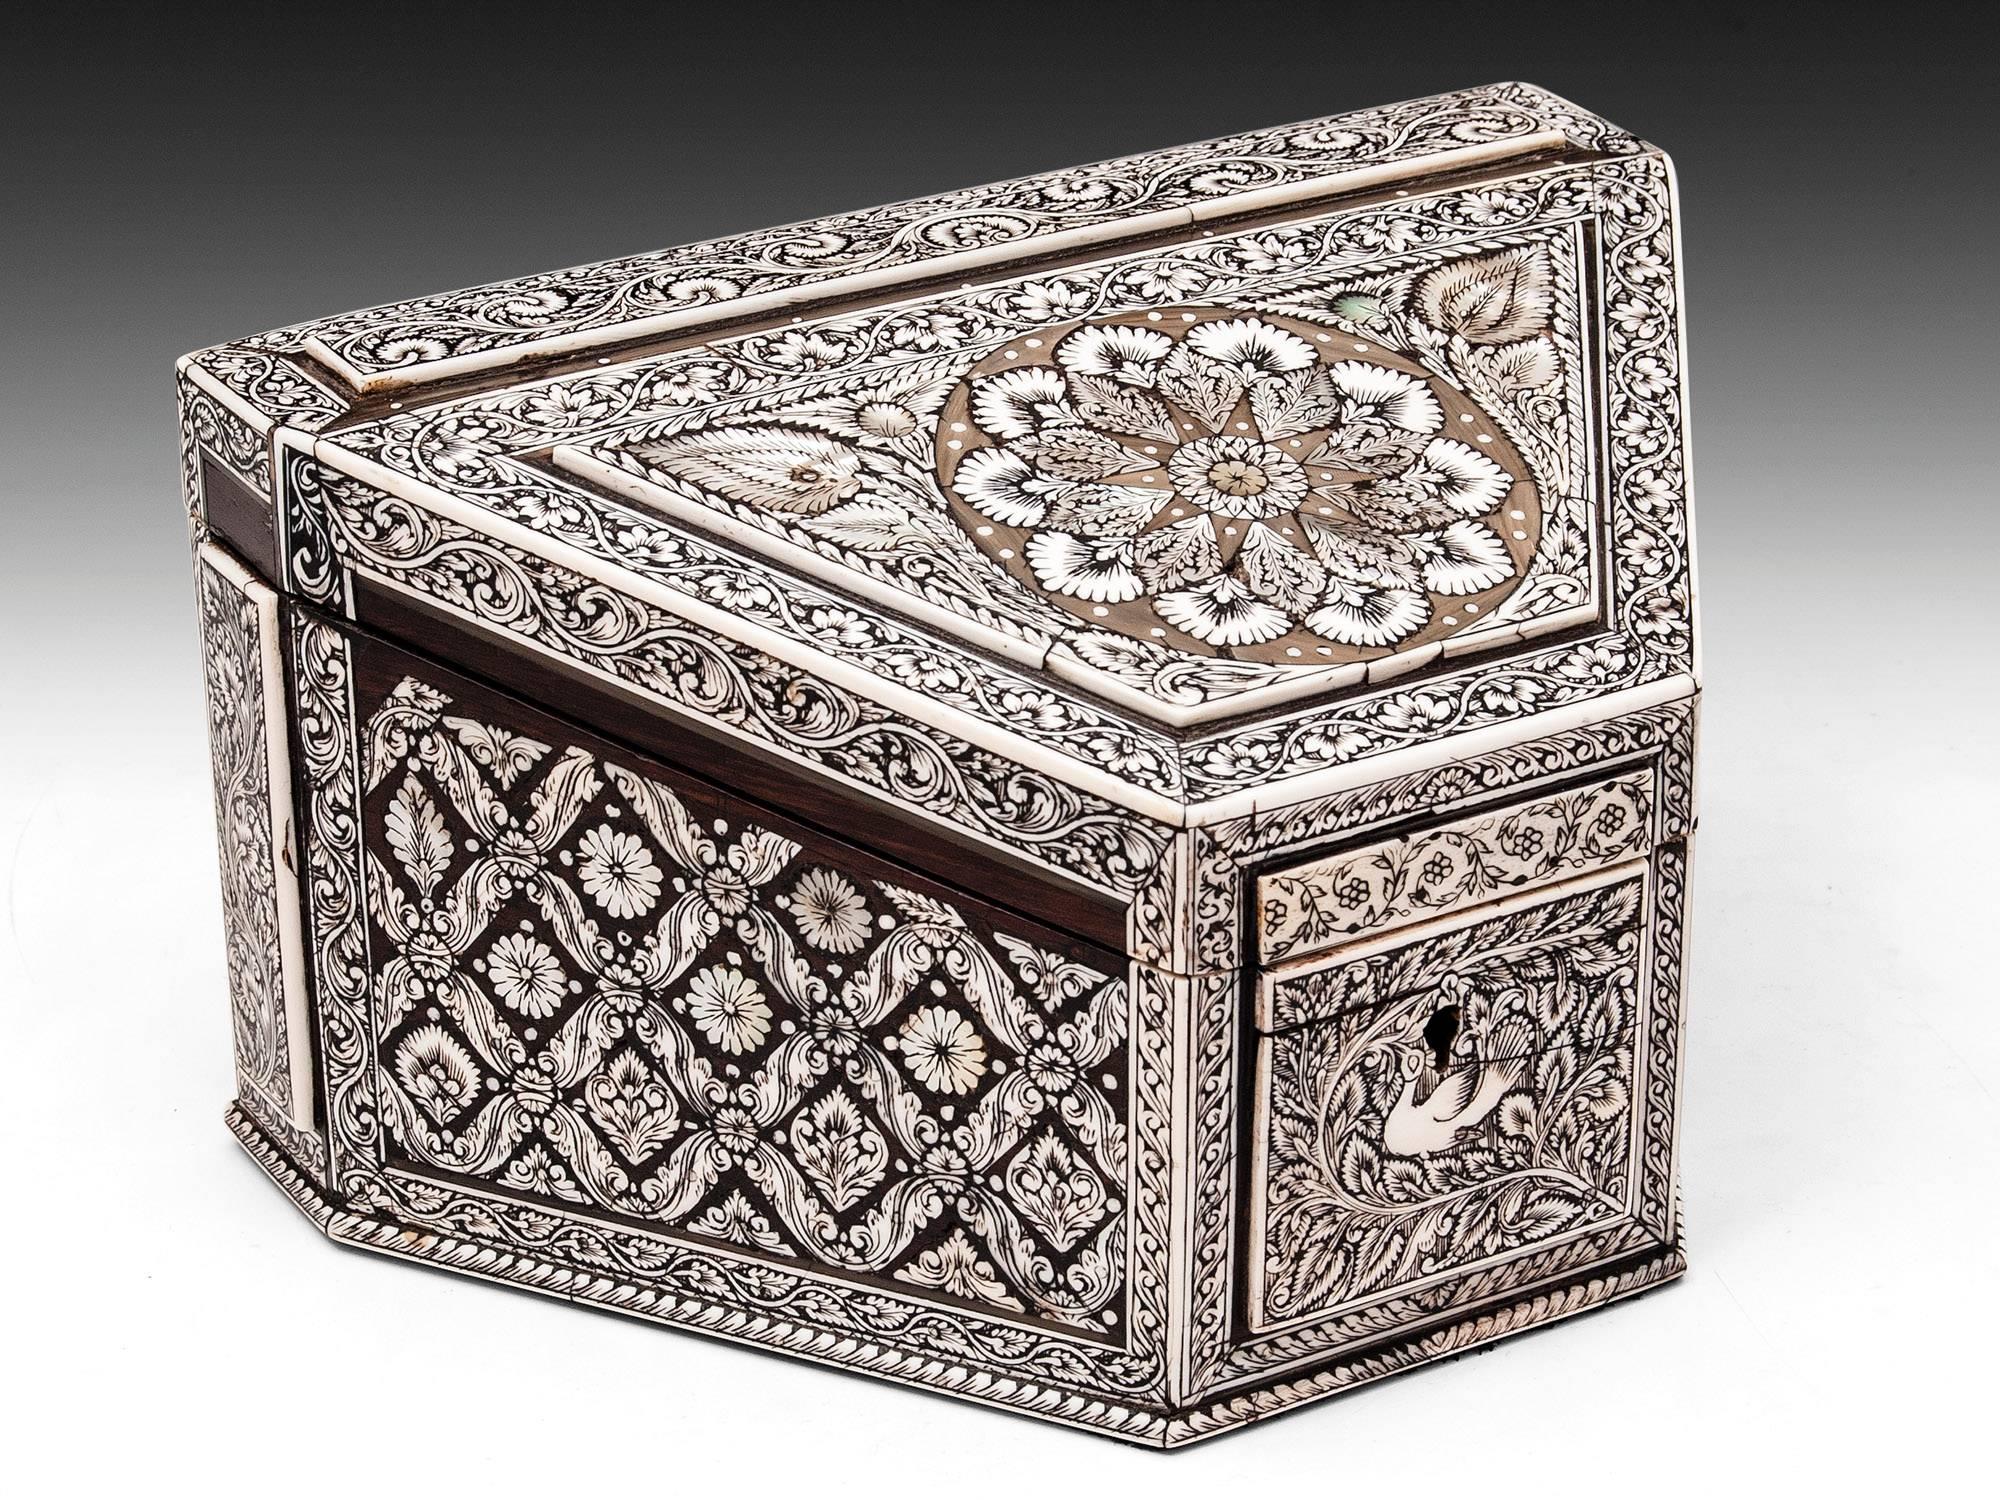 19th Century Anglo-Indian Stationery Box